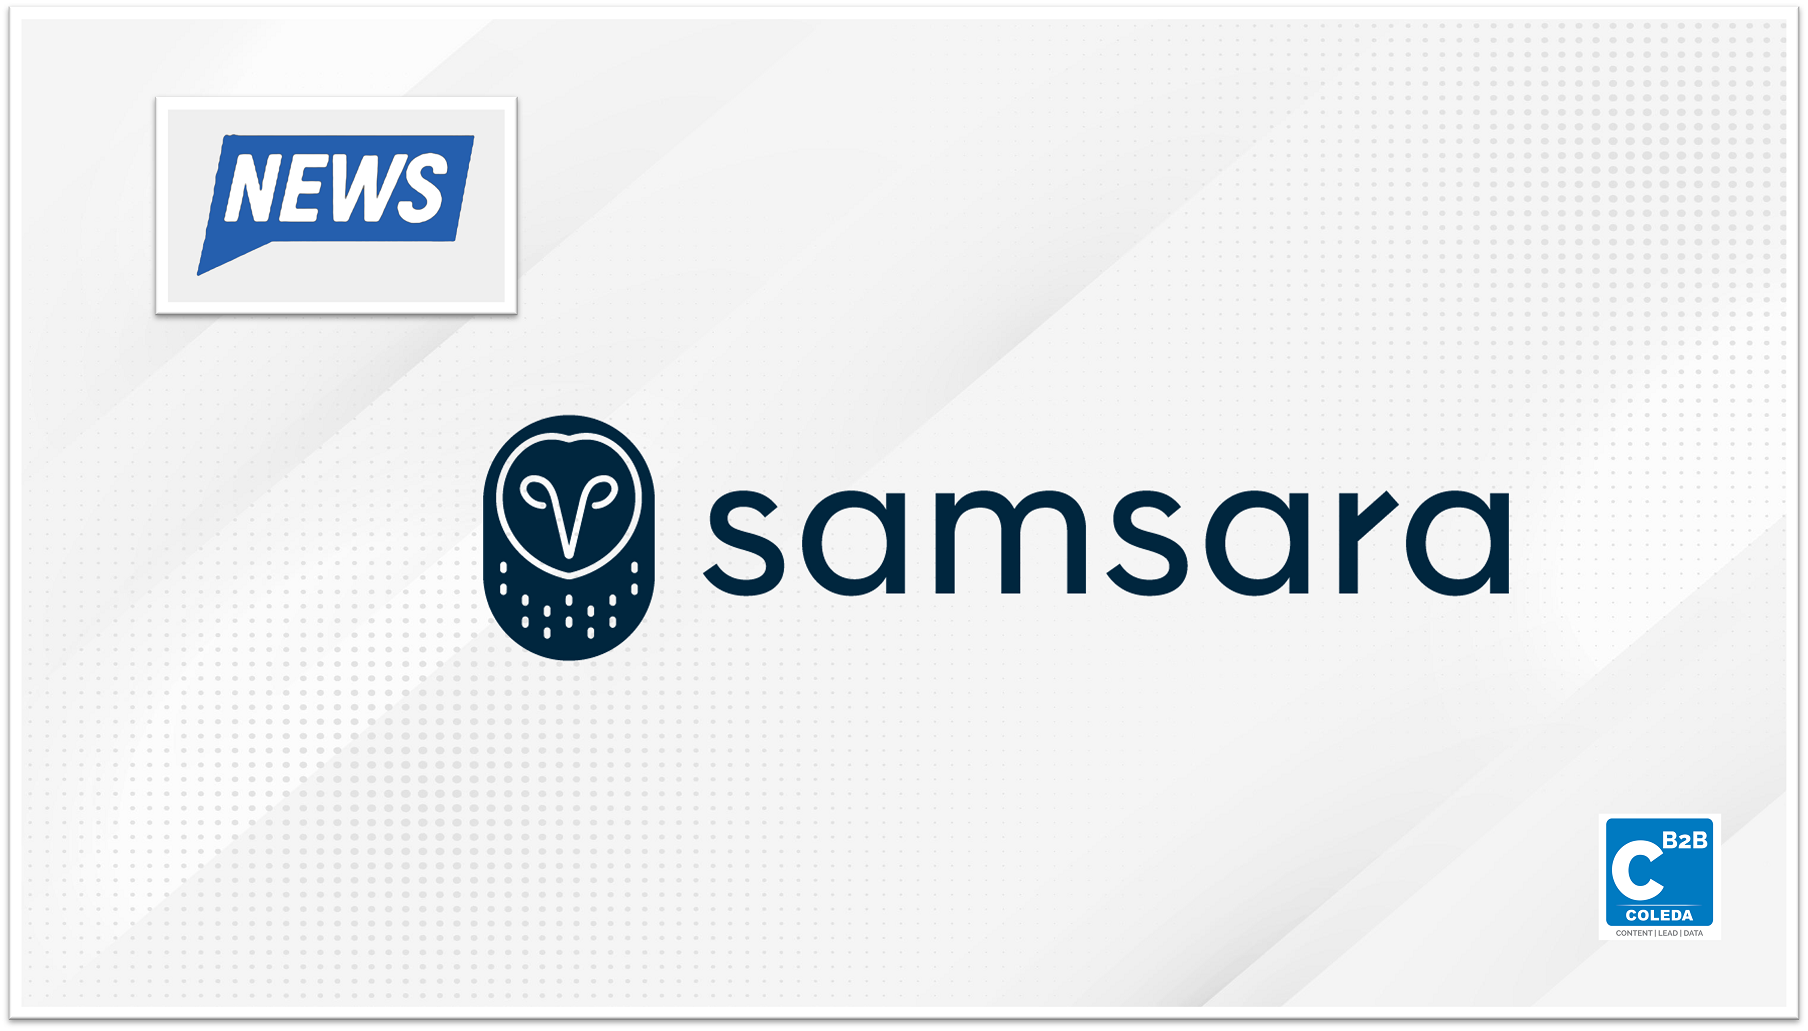 Samsara announces its presence in the upcoming meetings